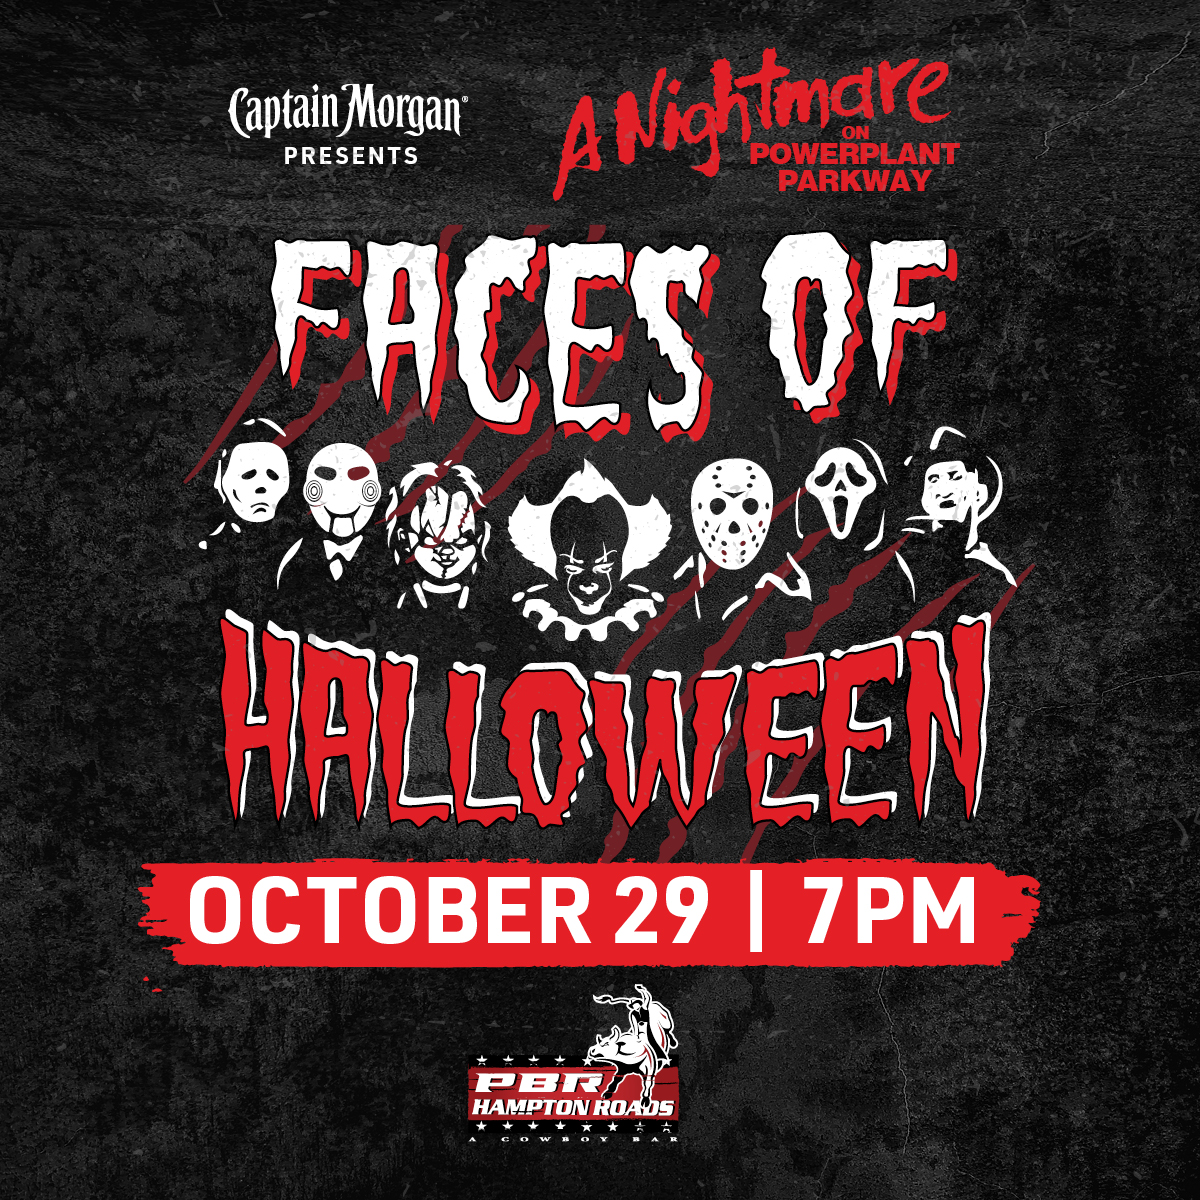 Nightmare on Power Plant Parkway: Faces of Halloween